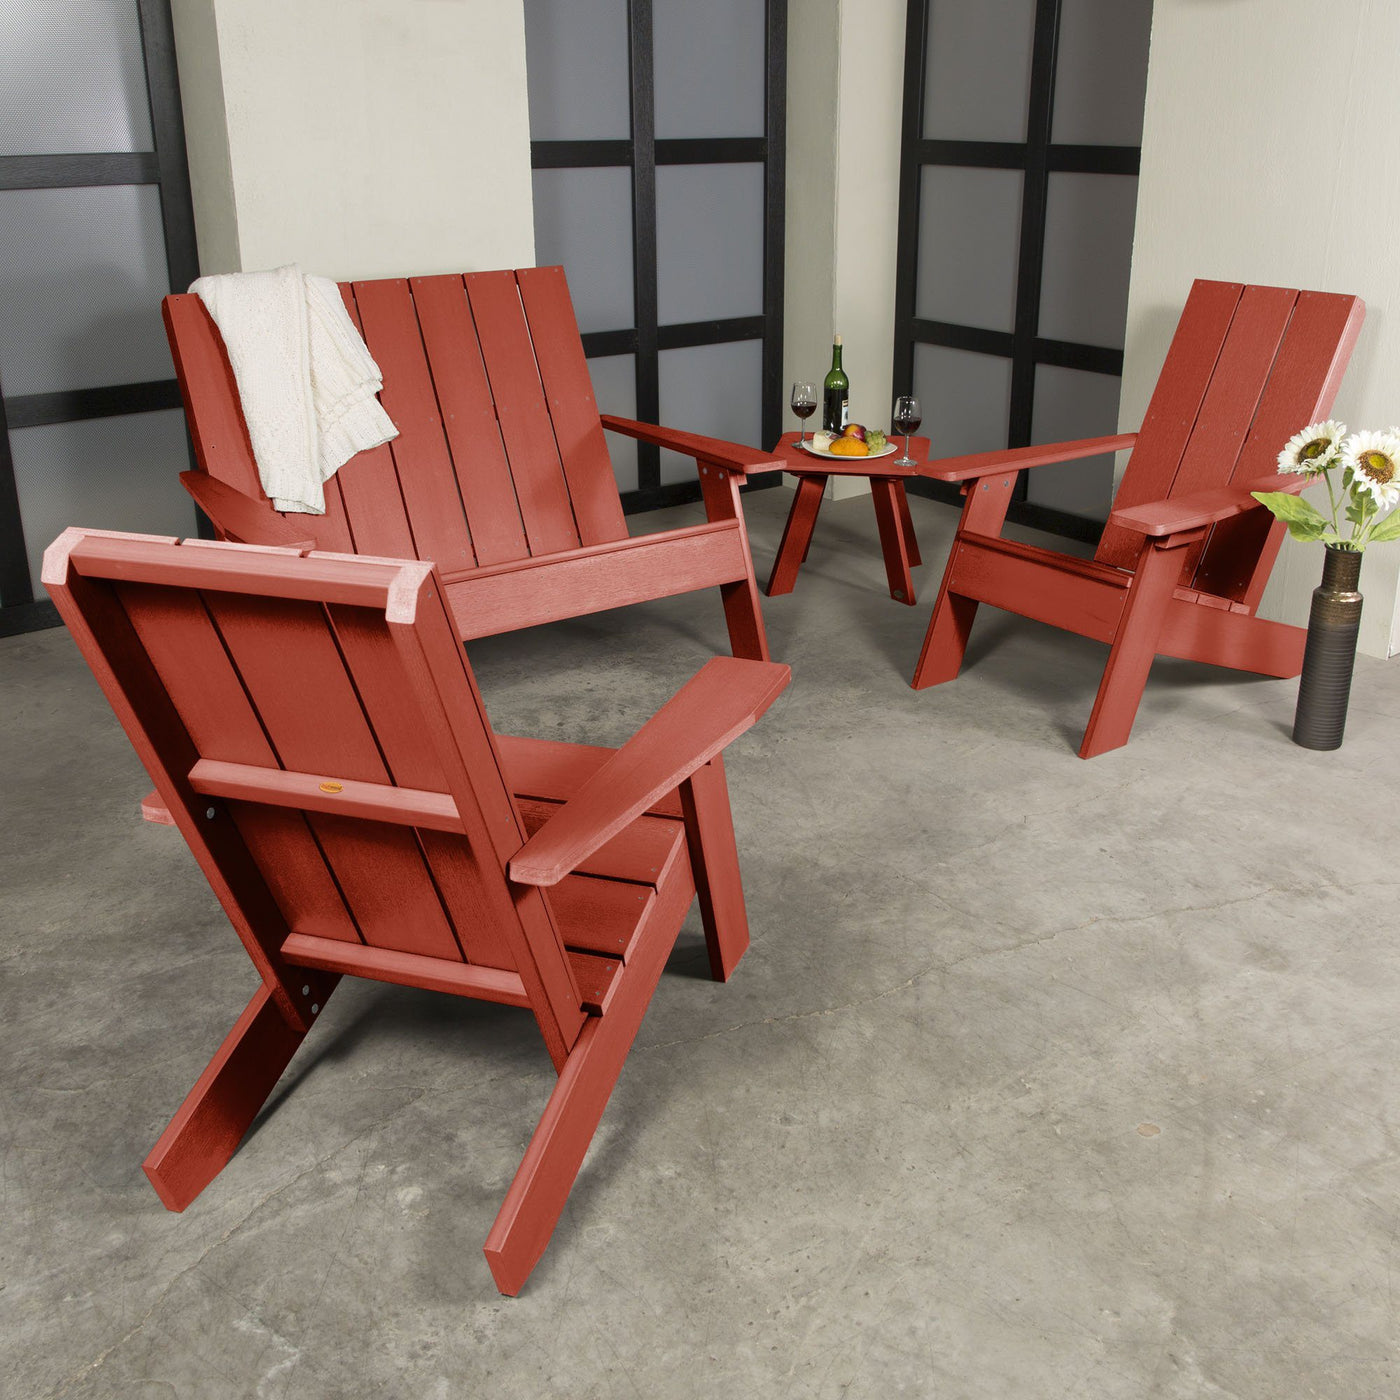 Red Italica 4-piece set on porch with decorations and wine. 